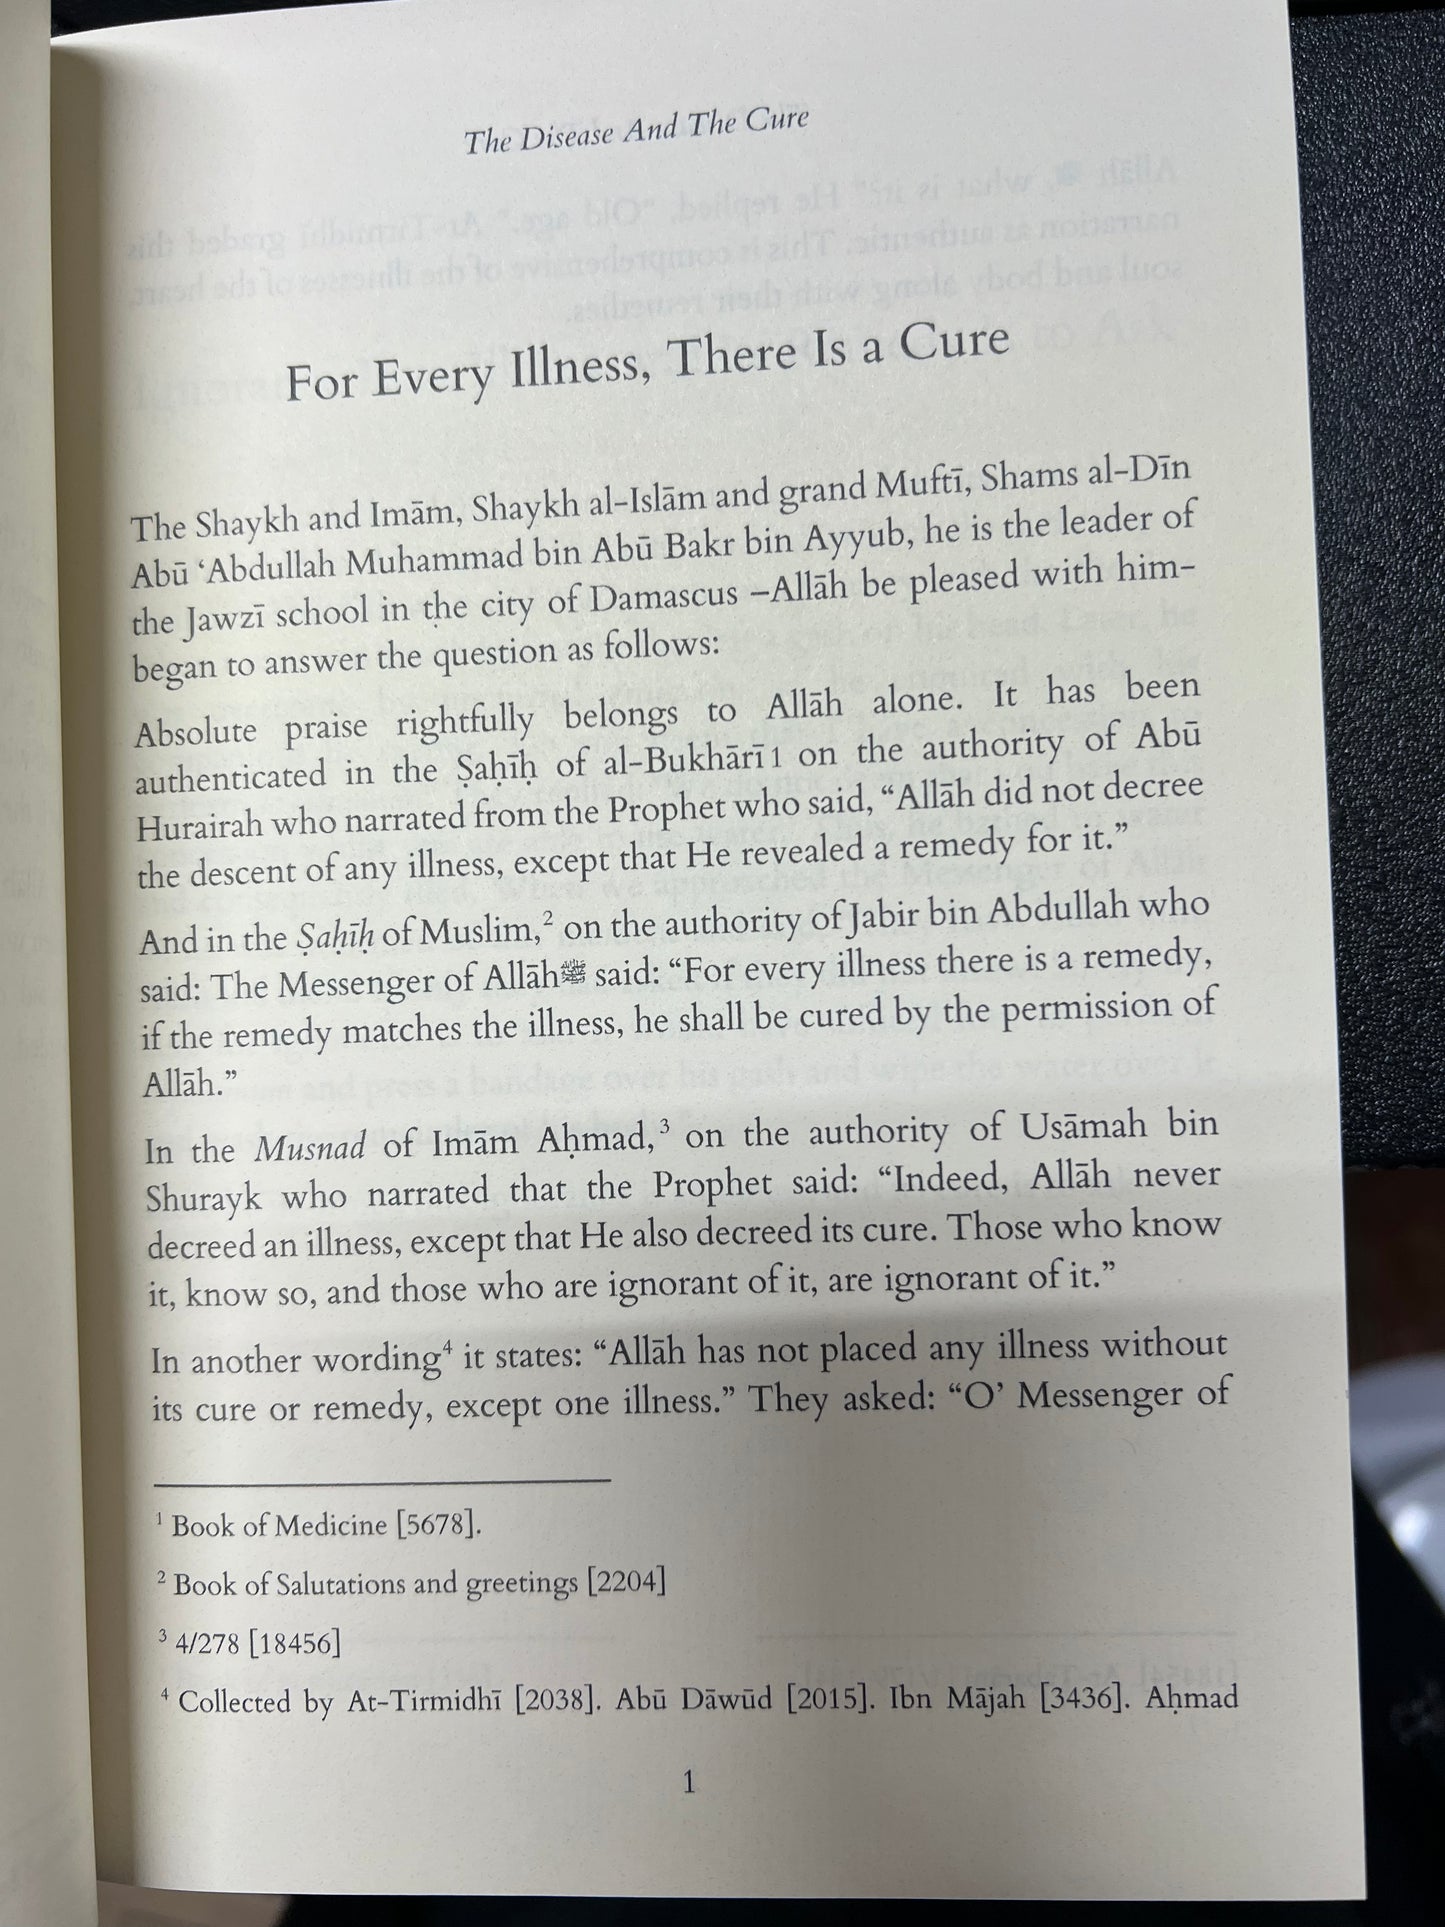 The Disease and The Cure by Imam Ibn Al-Qayyim